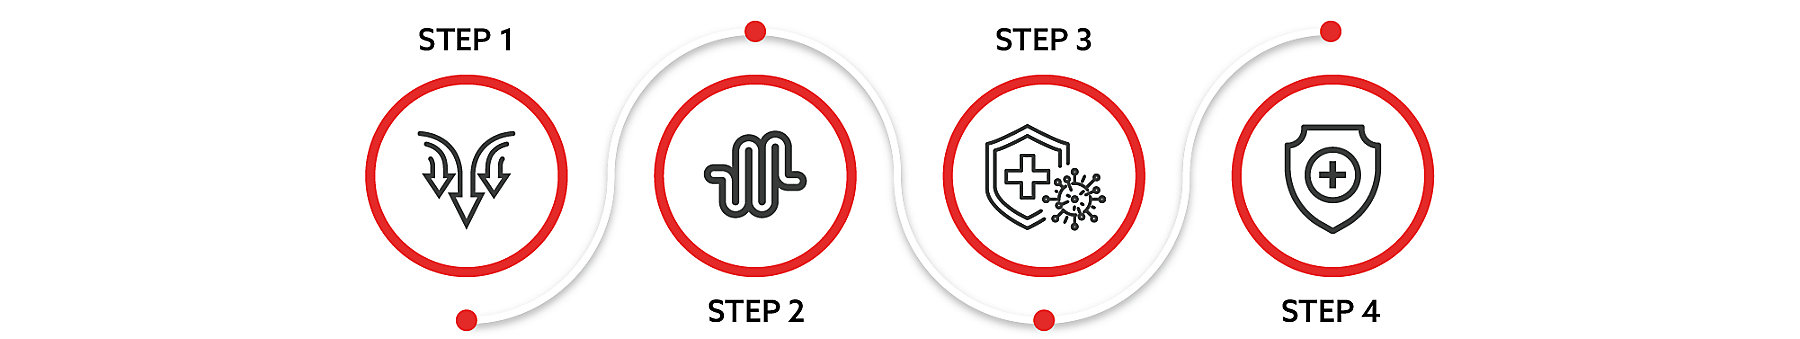 THE WATER SERIES STEP 1 TO 4 ICON BANNER